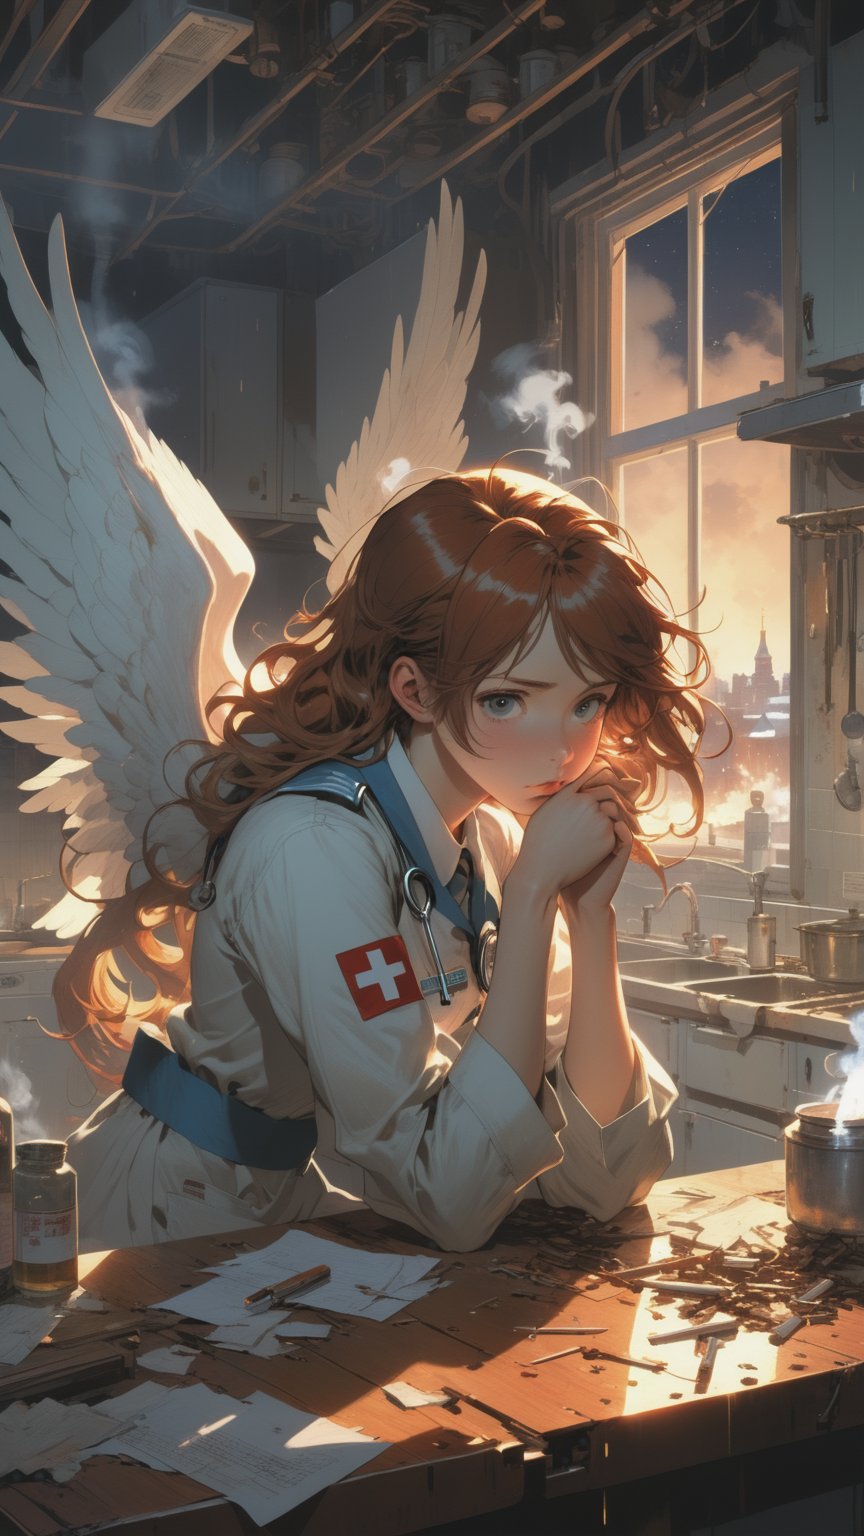 Anime artwork.  depressed angel anime girl (she has wings and long reddish hair and wearing a nurse uniform) sitting in a dirty russian-style kitchen in darkness and smoking a cigarette,  only the dim light from a nimbus and the cigarette is illuminating in the room; on the outside of the window there's a photorealistic view on a night winter russian city of Norilsk with block buildings; on the table there is a syringe and some lab chemical stuff. art by Makoto Shinkai,  art by J.C. Leyendecker
Negative prompt: Gaussian noise,  worst quality,  bad photo,  deformed,  disfigured,  low contrast,  ugly,  blurry,  rough draft,  boring,  plain,  simple

